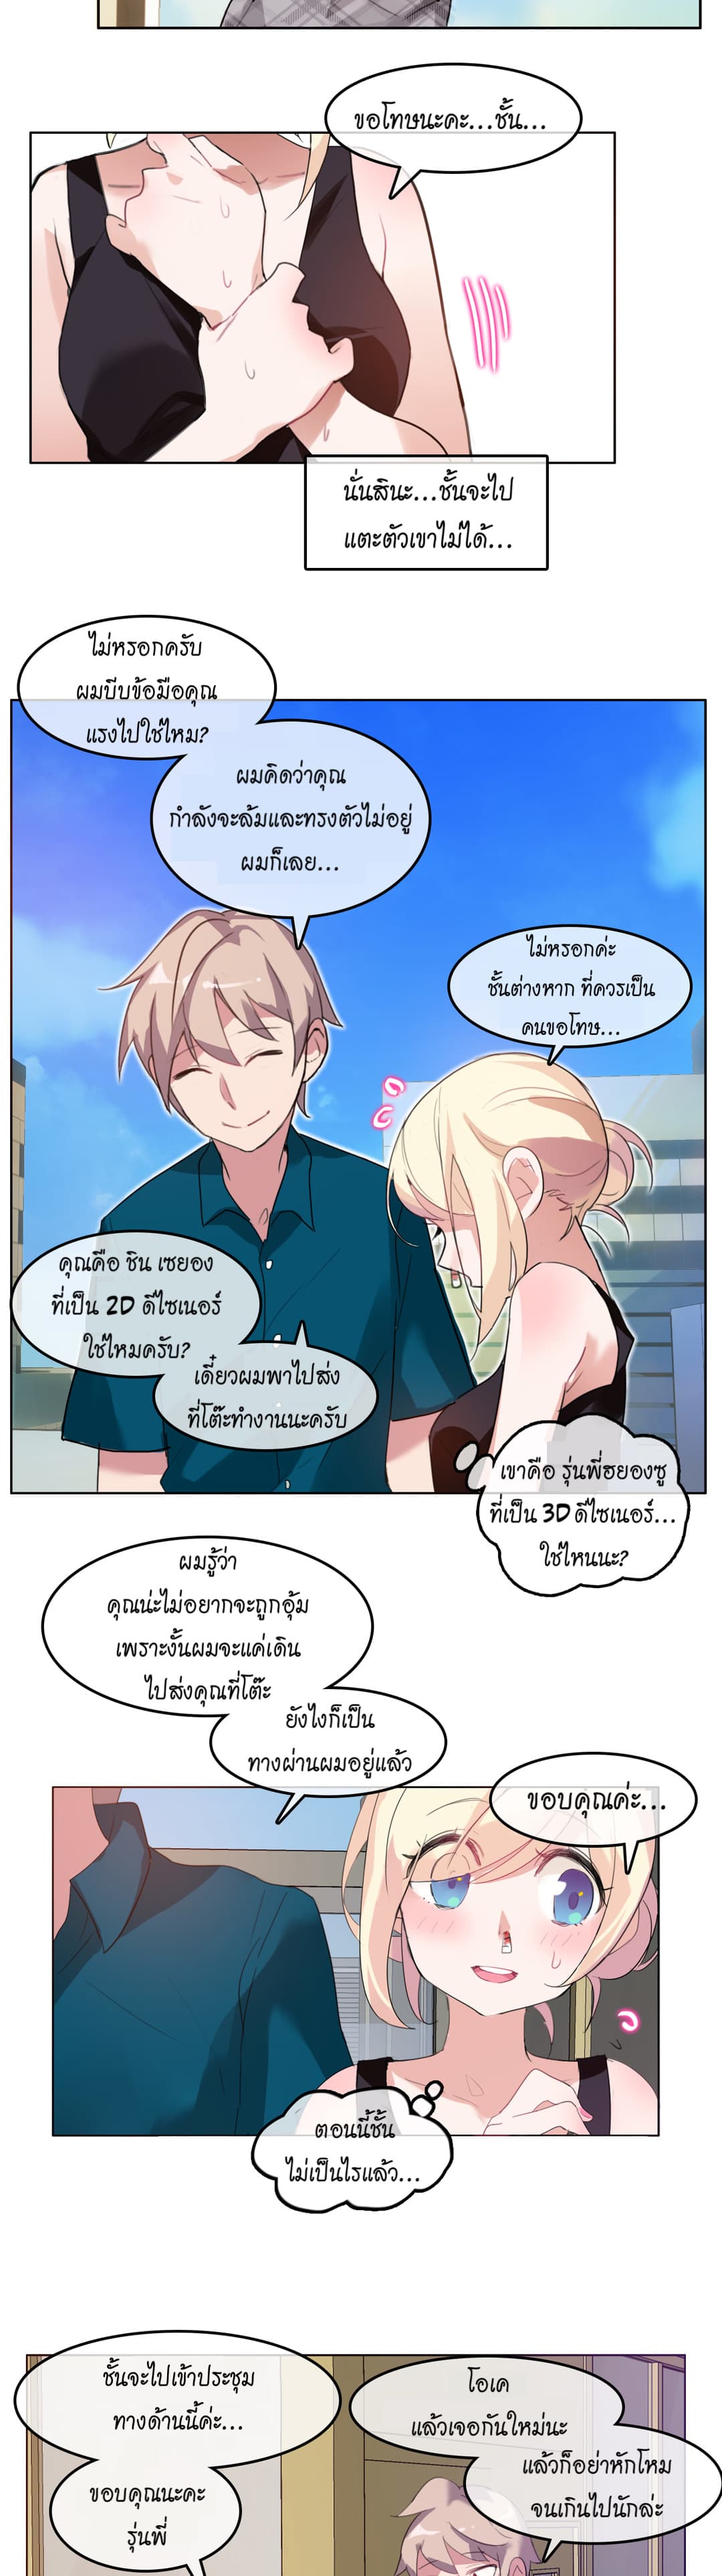 A Pervert’s Daily Life 5 (21)